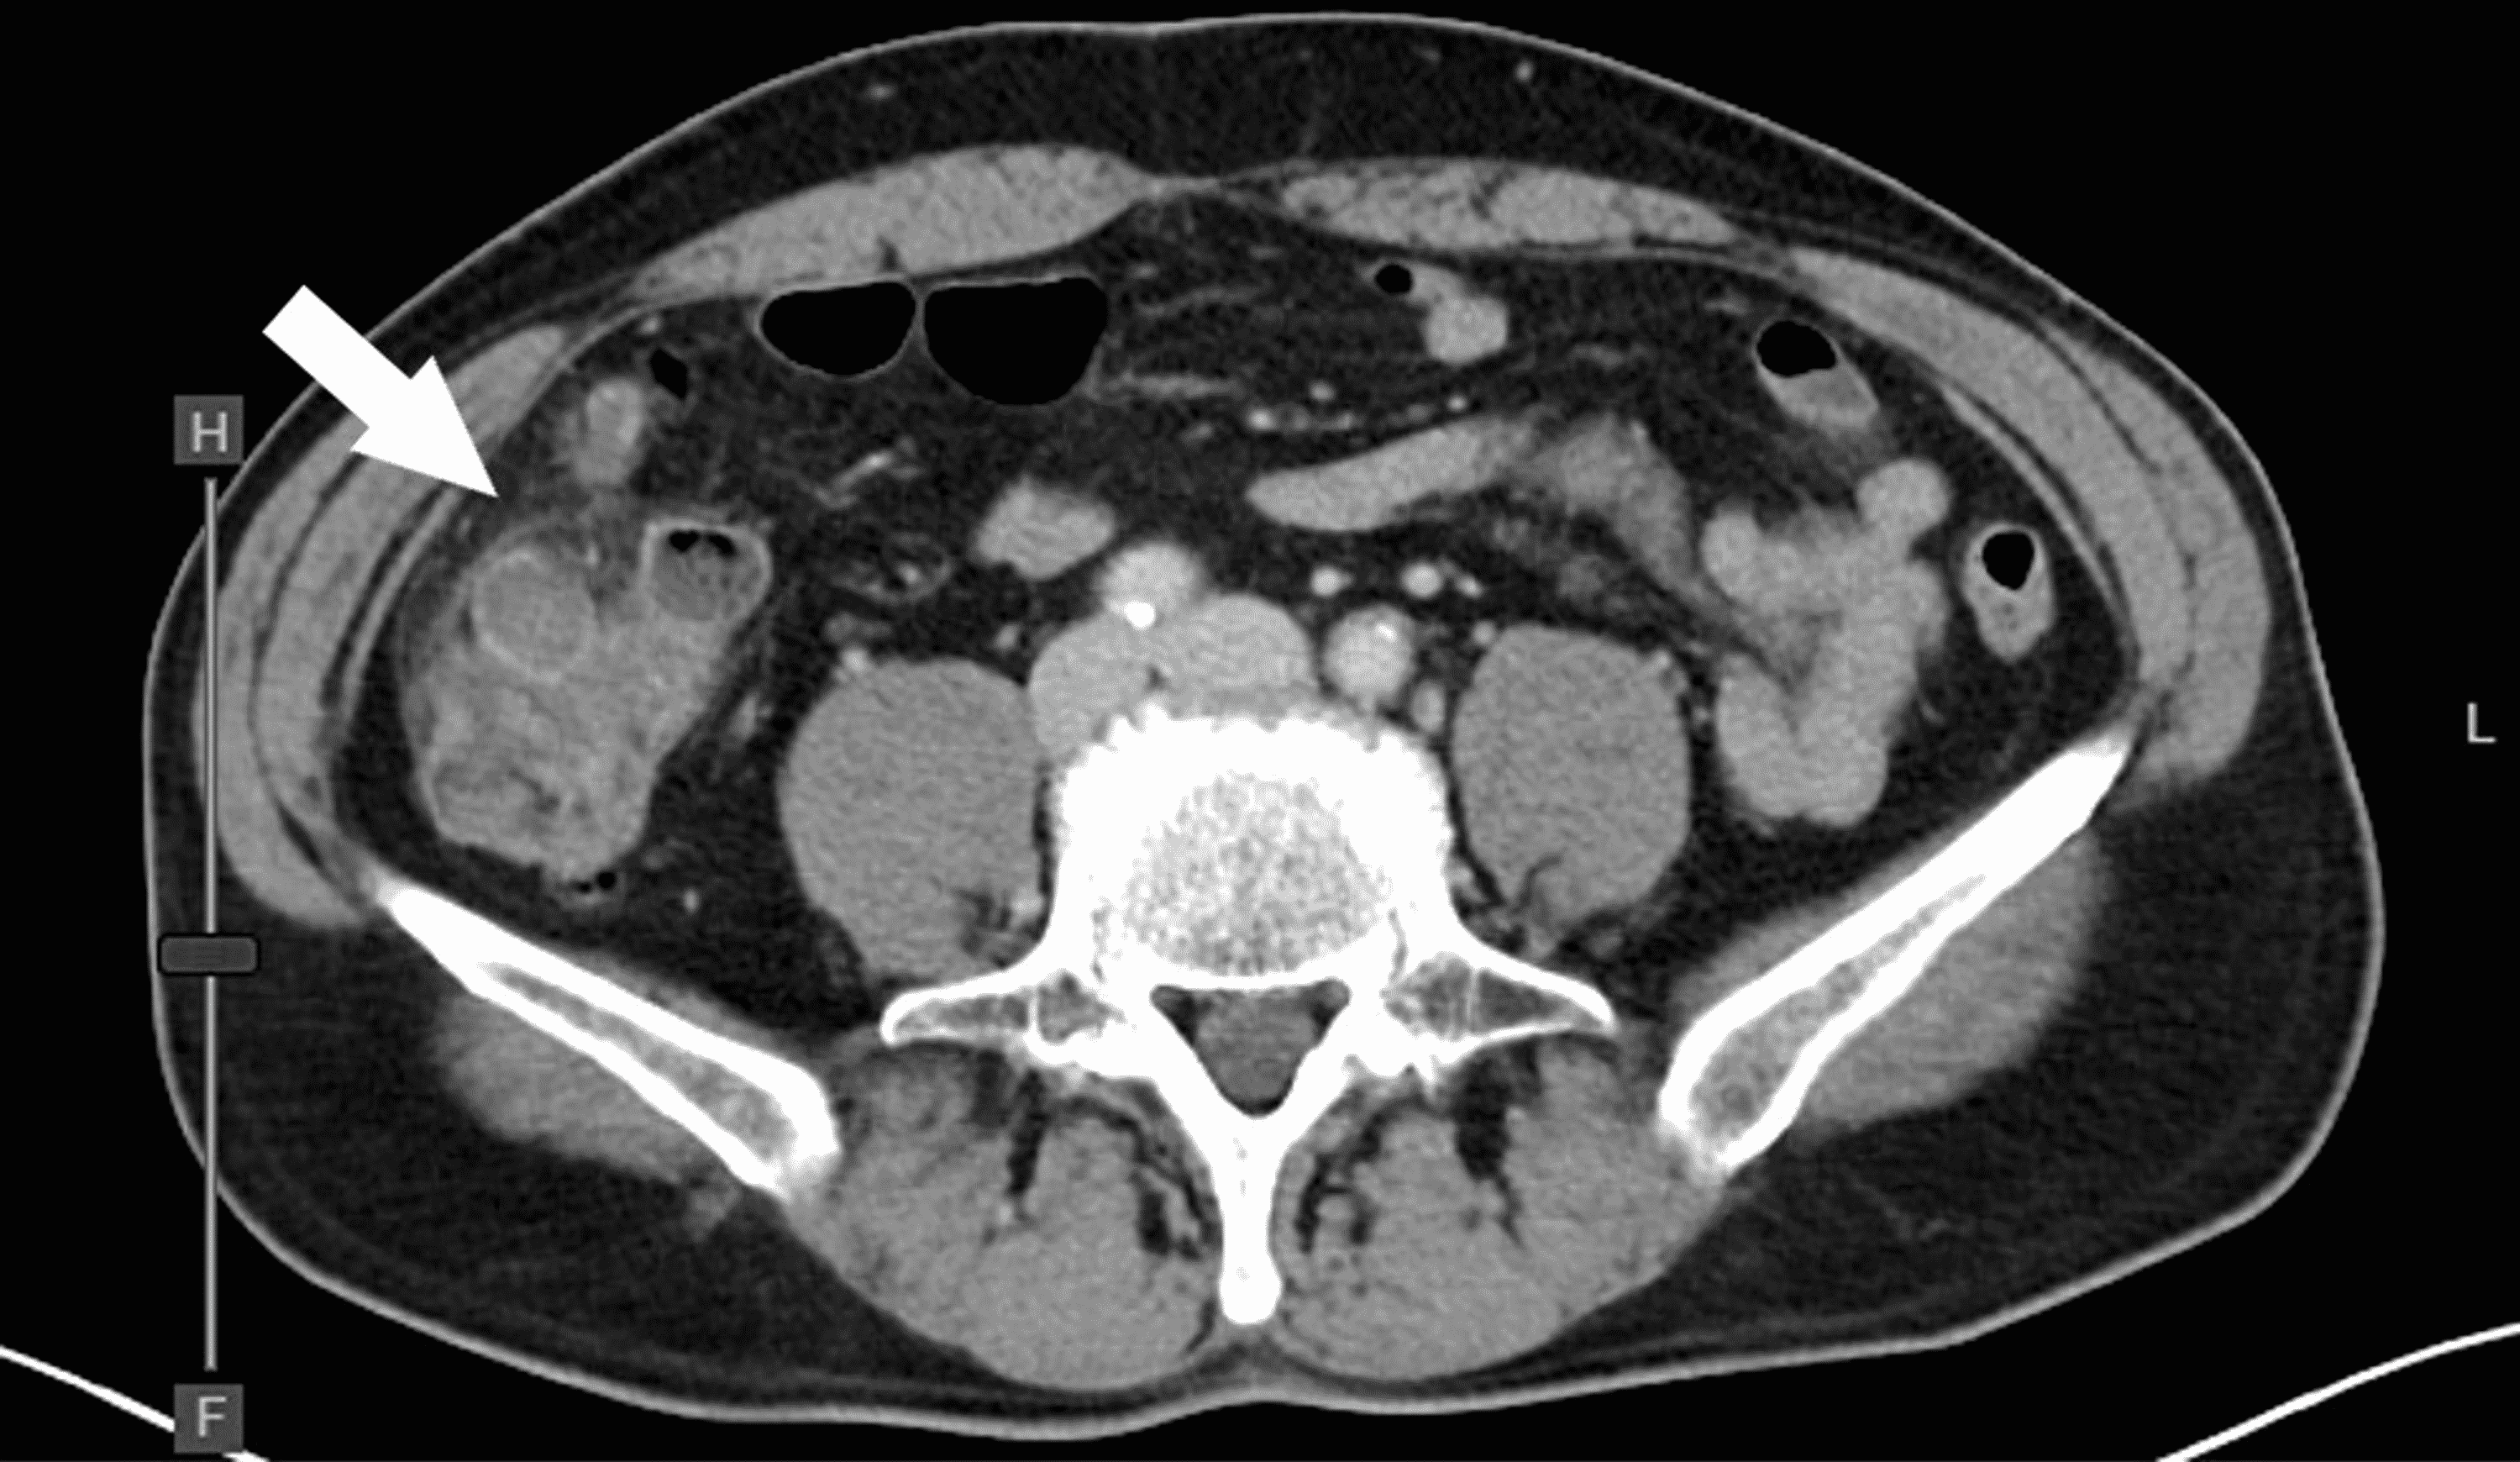 Cureus A Case Of Cecal Diverticulitis Complicated By Pseudoaneurysm In The Ileocolic Artery 0209